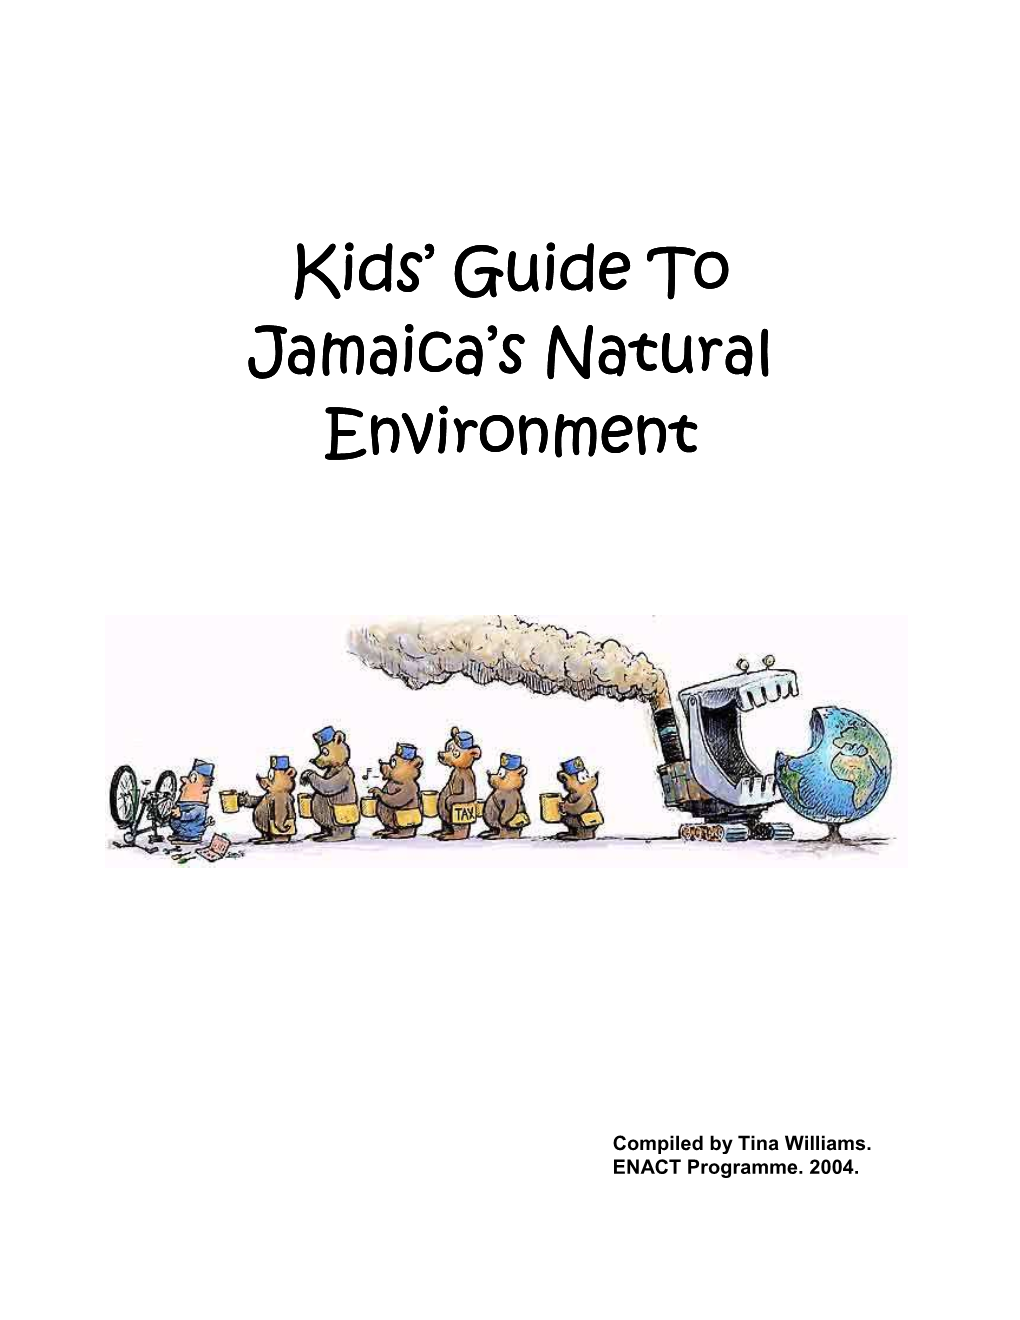 Kids' Guide to Jamaica's Natural Environment Environment